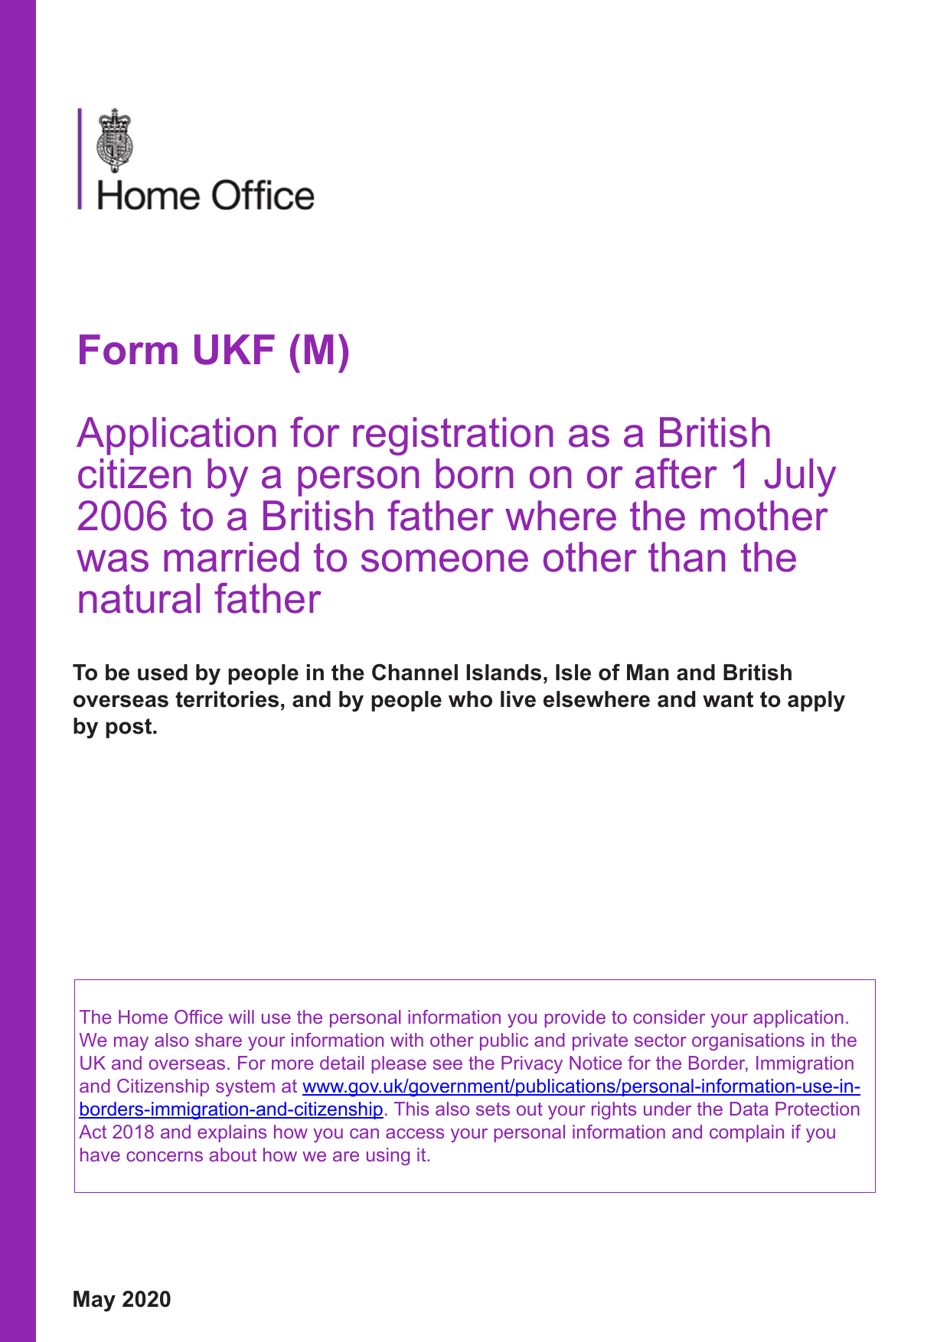 Form UKF (M) Application for Registration as a British Citizen by a Person Born on or After 1 July 2006 to a British Father Where the Mother Was Married to Someone Other Than the Natural Father - United Kingdom, Page 1